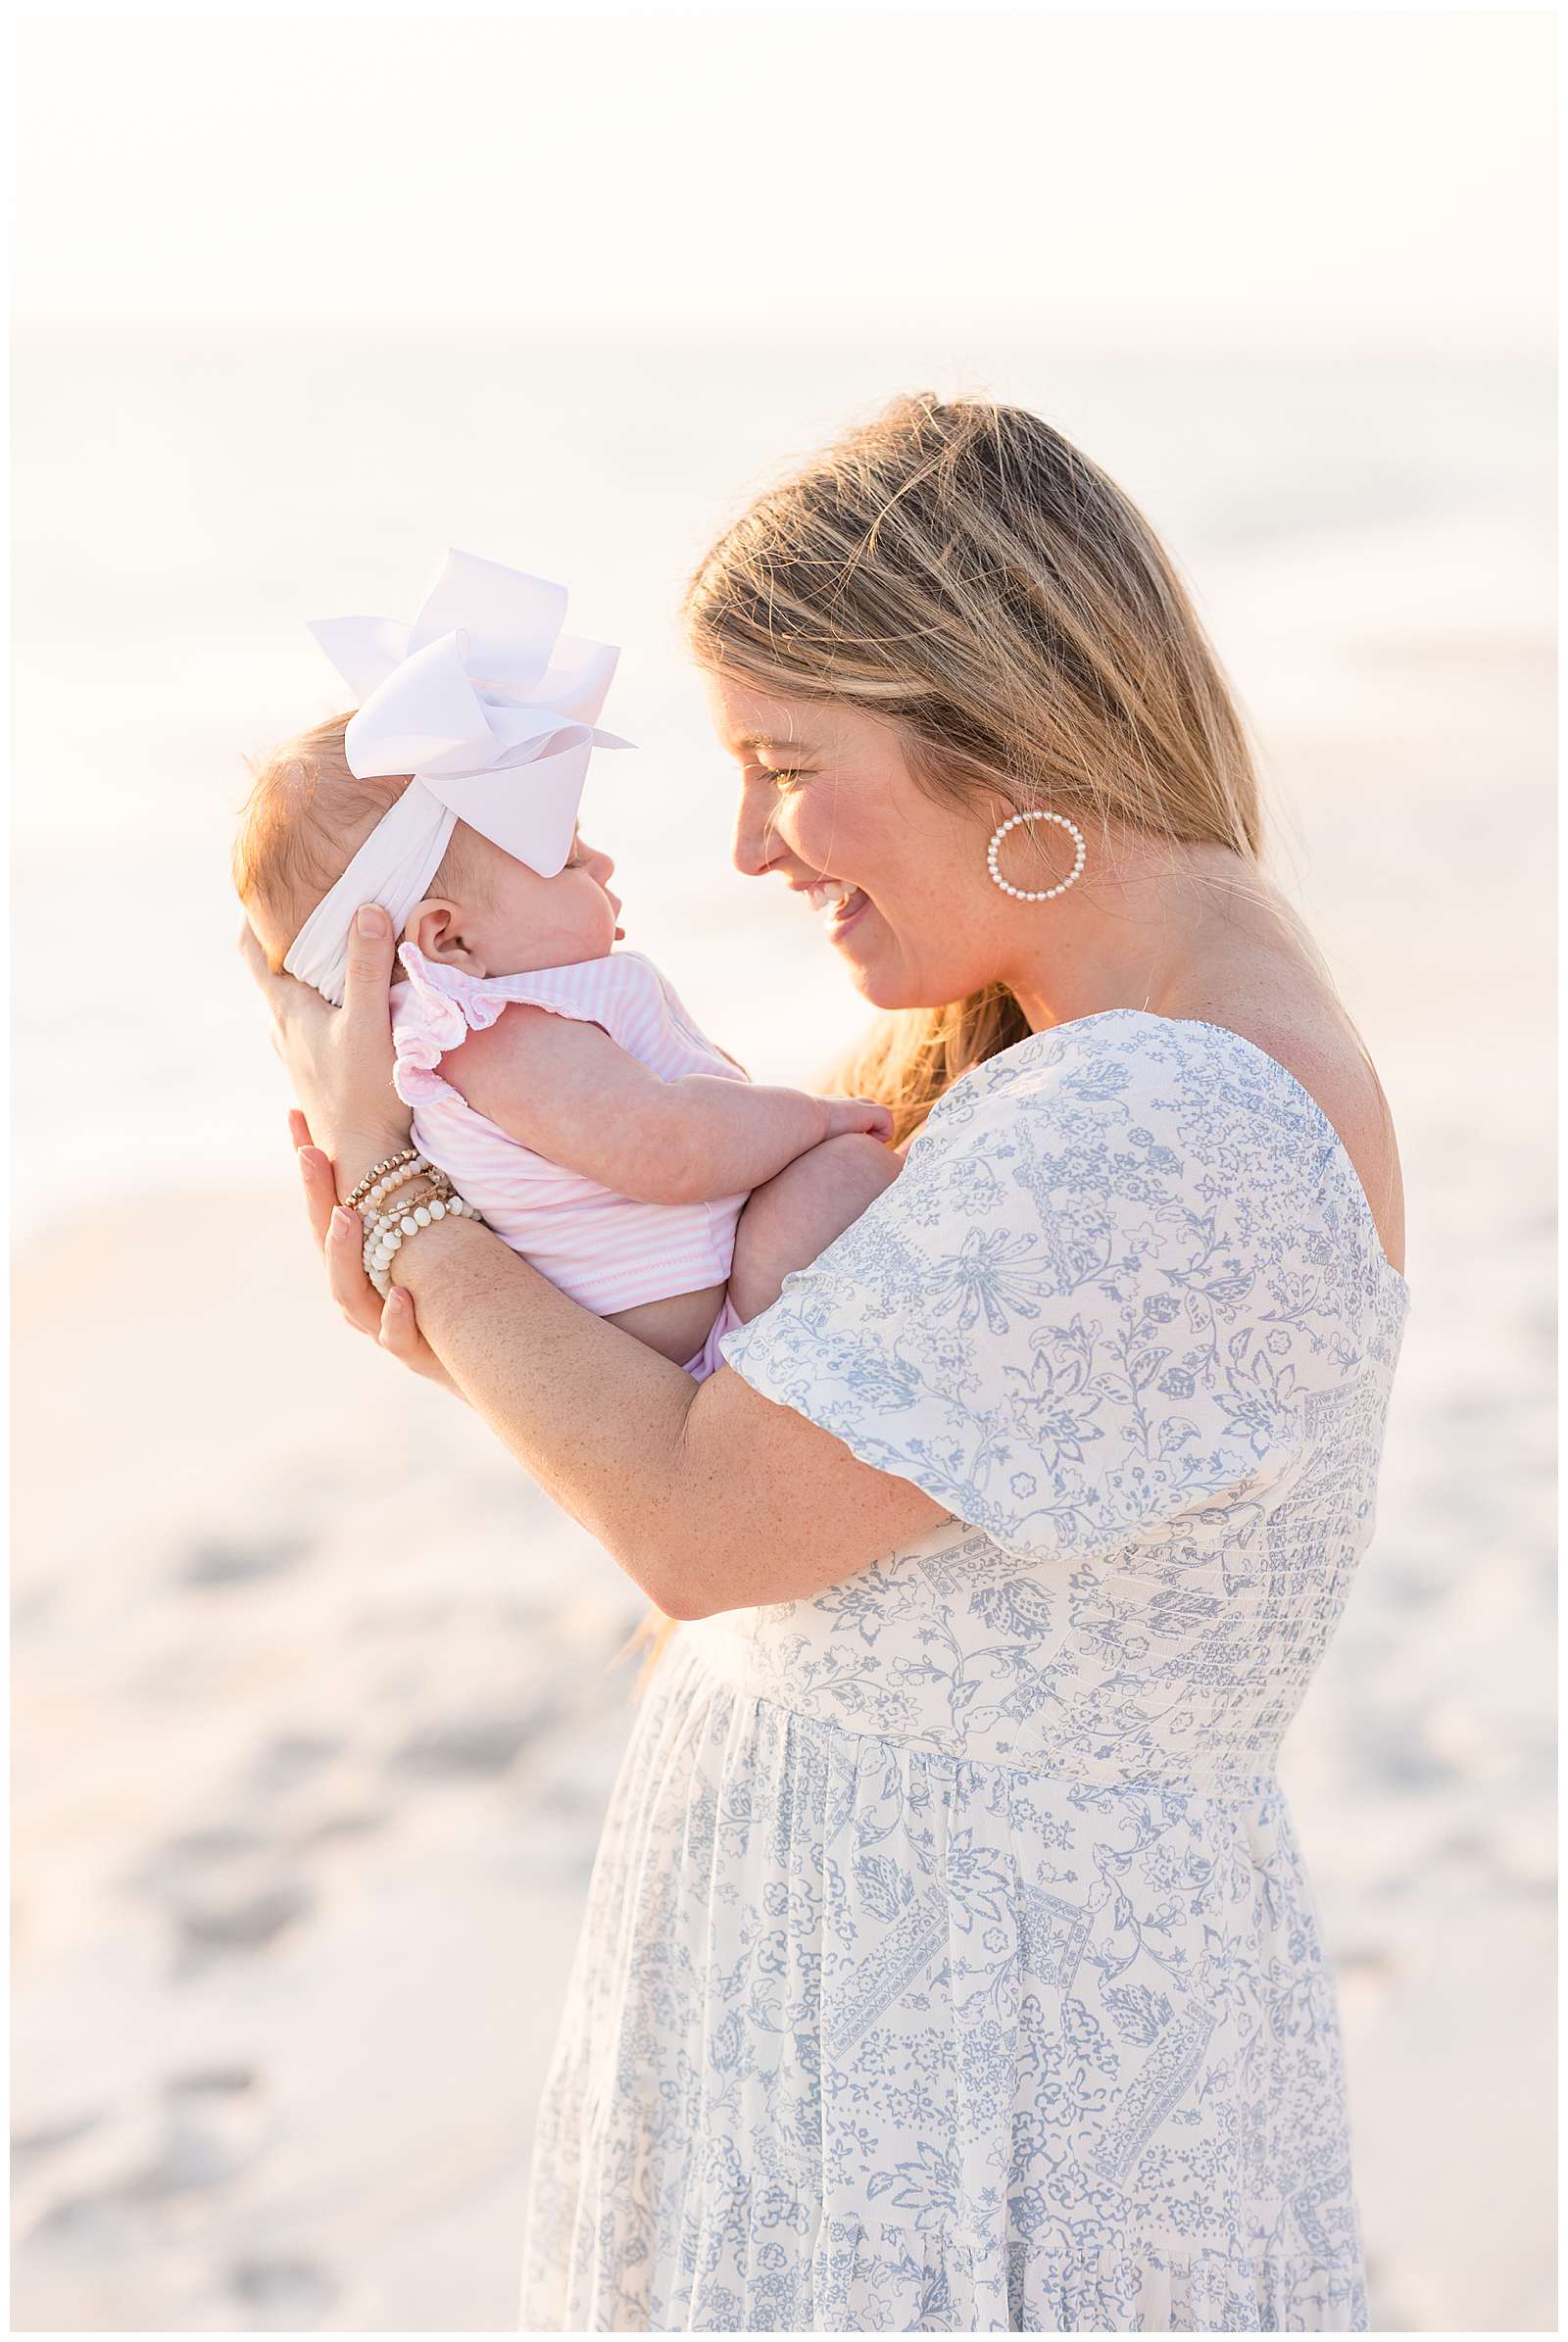 New mom who is wearing a white and blue floral dress with hoop earrings and bracelets, holds her baby girl in her arms sitting on her chest wearing a pink and white short sleeve and shorts outfit and a big, white headband bow.  Click to see more on the blog today! -rebeccaricephoto.com